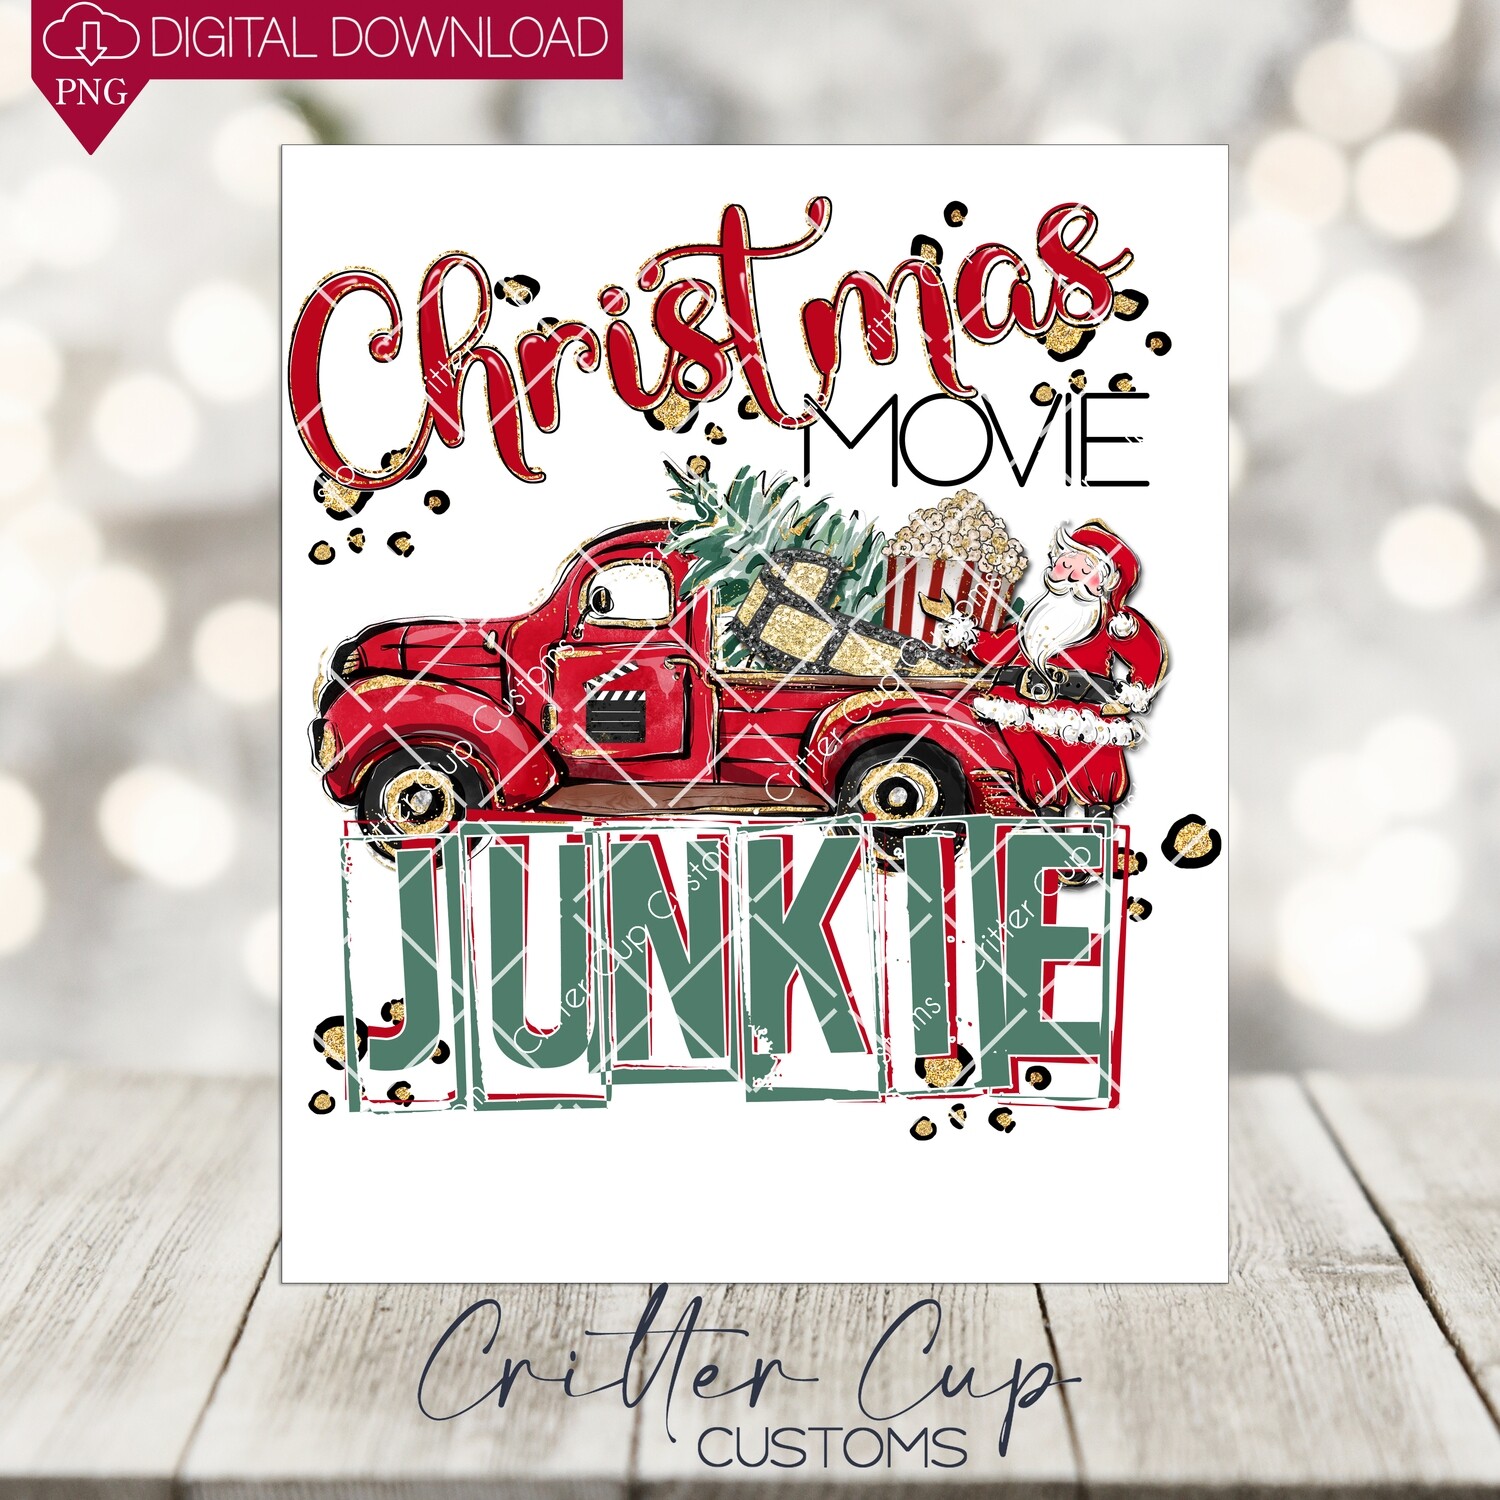 Christmas Movie Junkie Truck
Sublimation/Decal Design